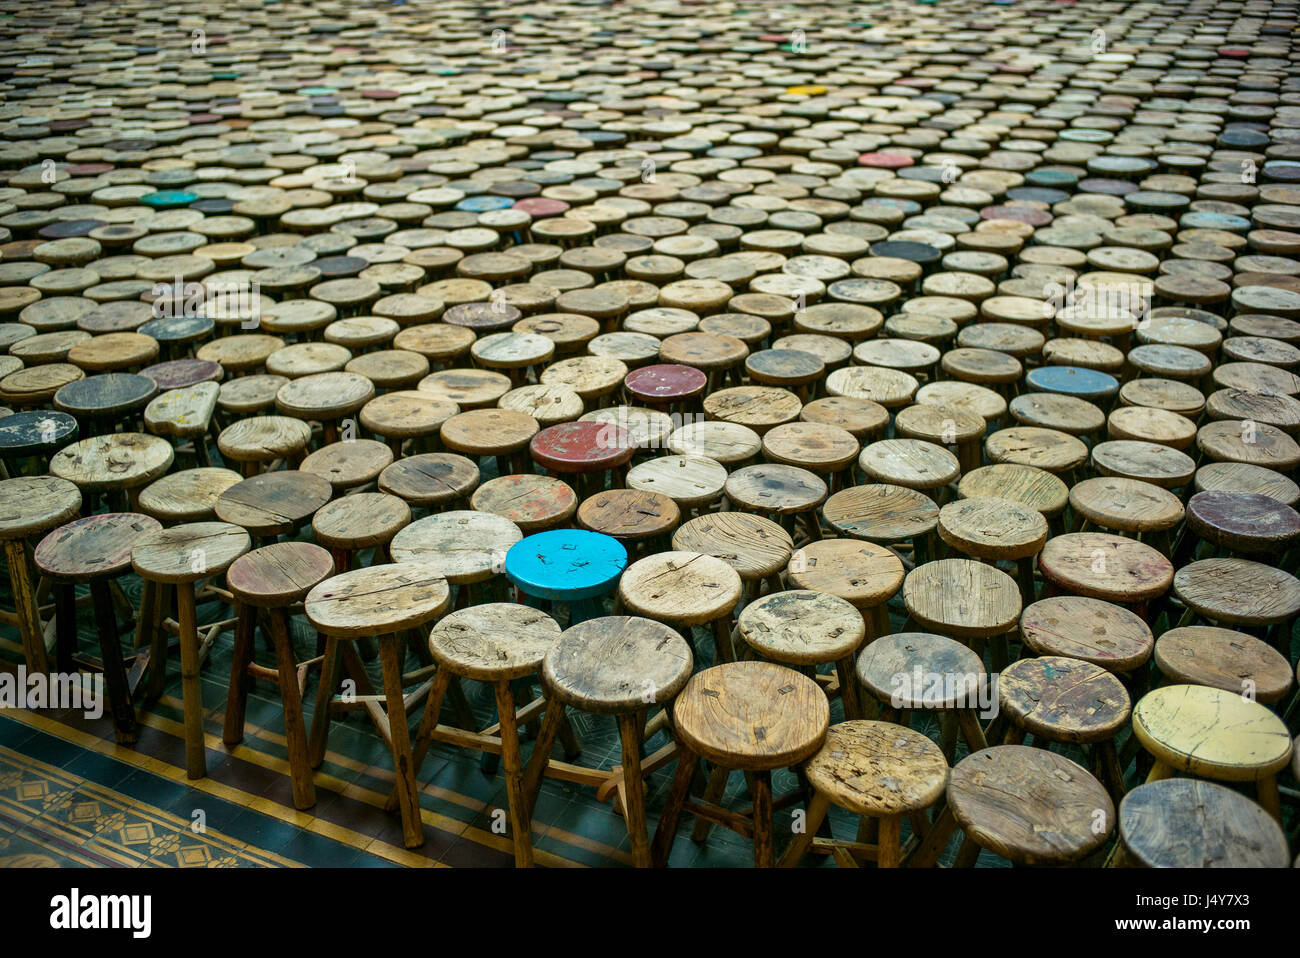 Ming period three legged stools, part of the Chinese artist AiWeiwei installation in the Martin Gropius museum, Berlin. Stock Photo